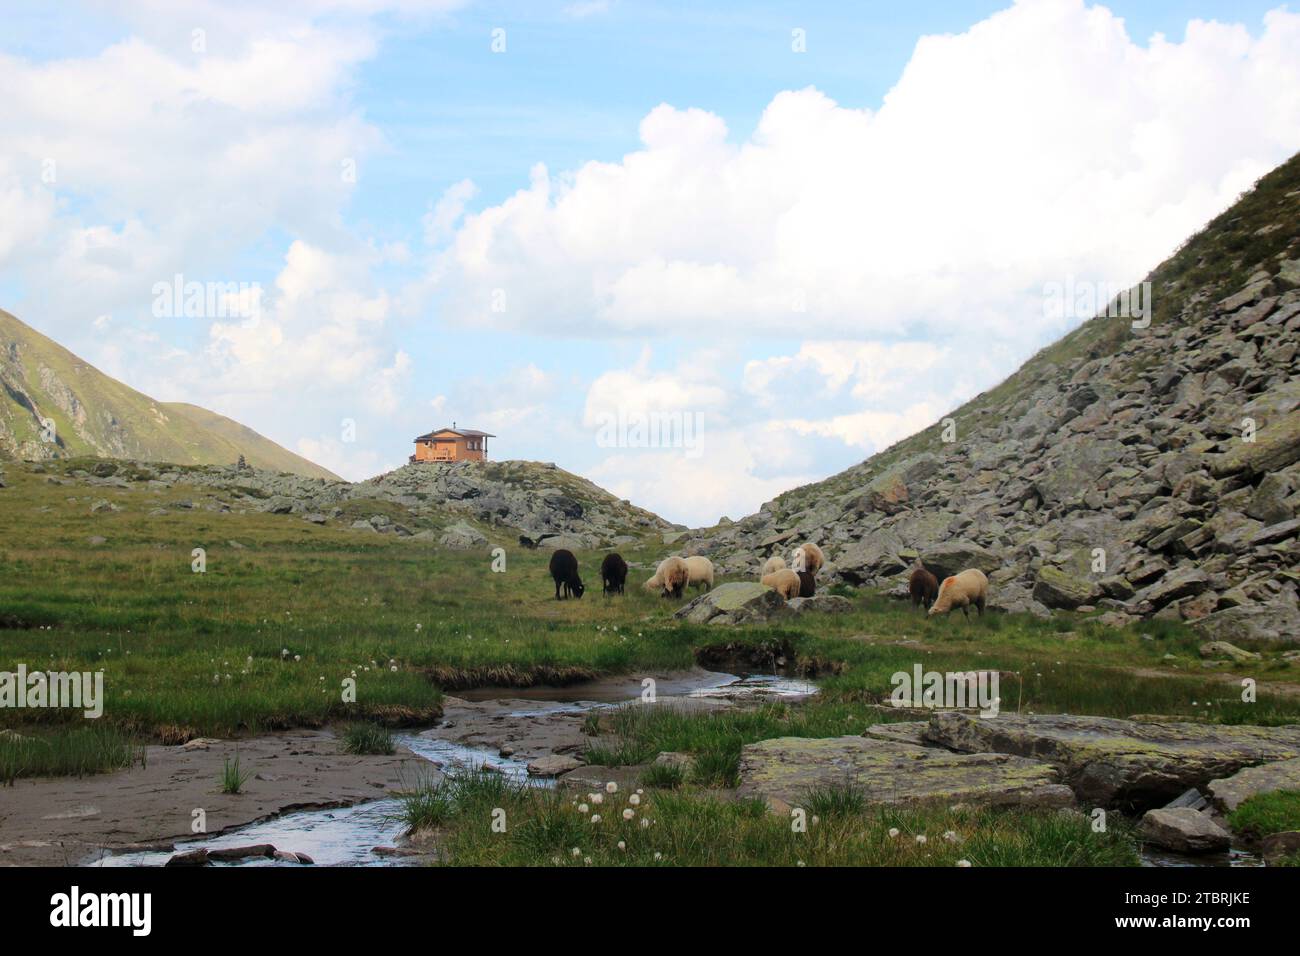 atmospheric course of the Seebach stream on the hiking trail to Hundstaller See (2289m), mountain sheep grazing peacefully, hiking tour near Inzing, I Stock Photo